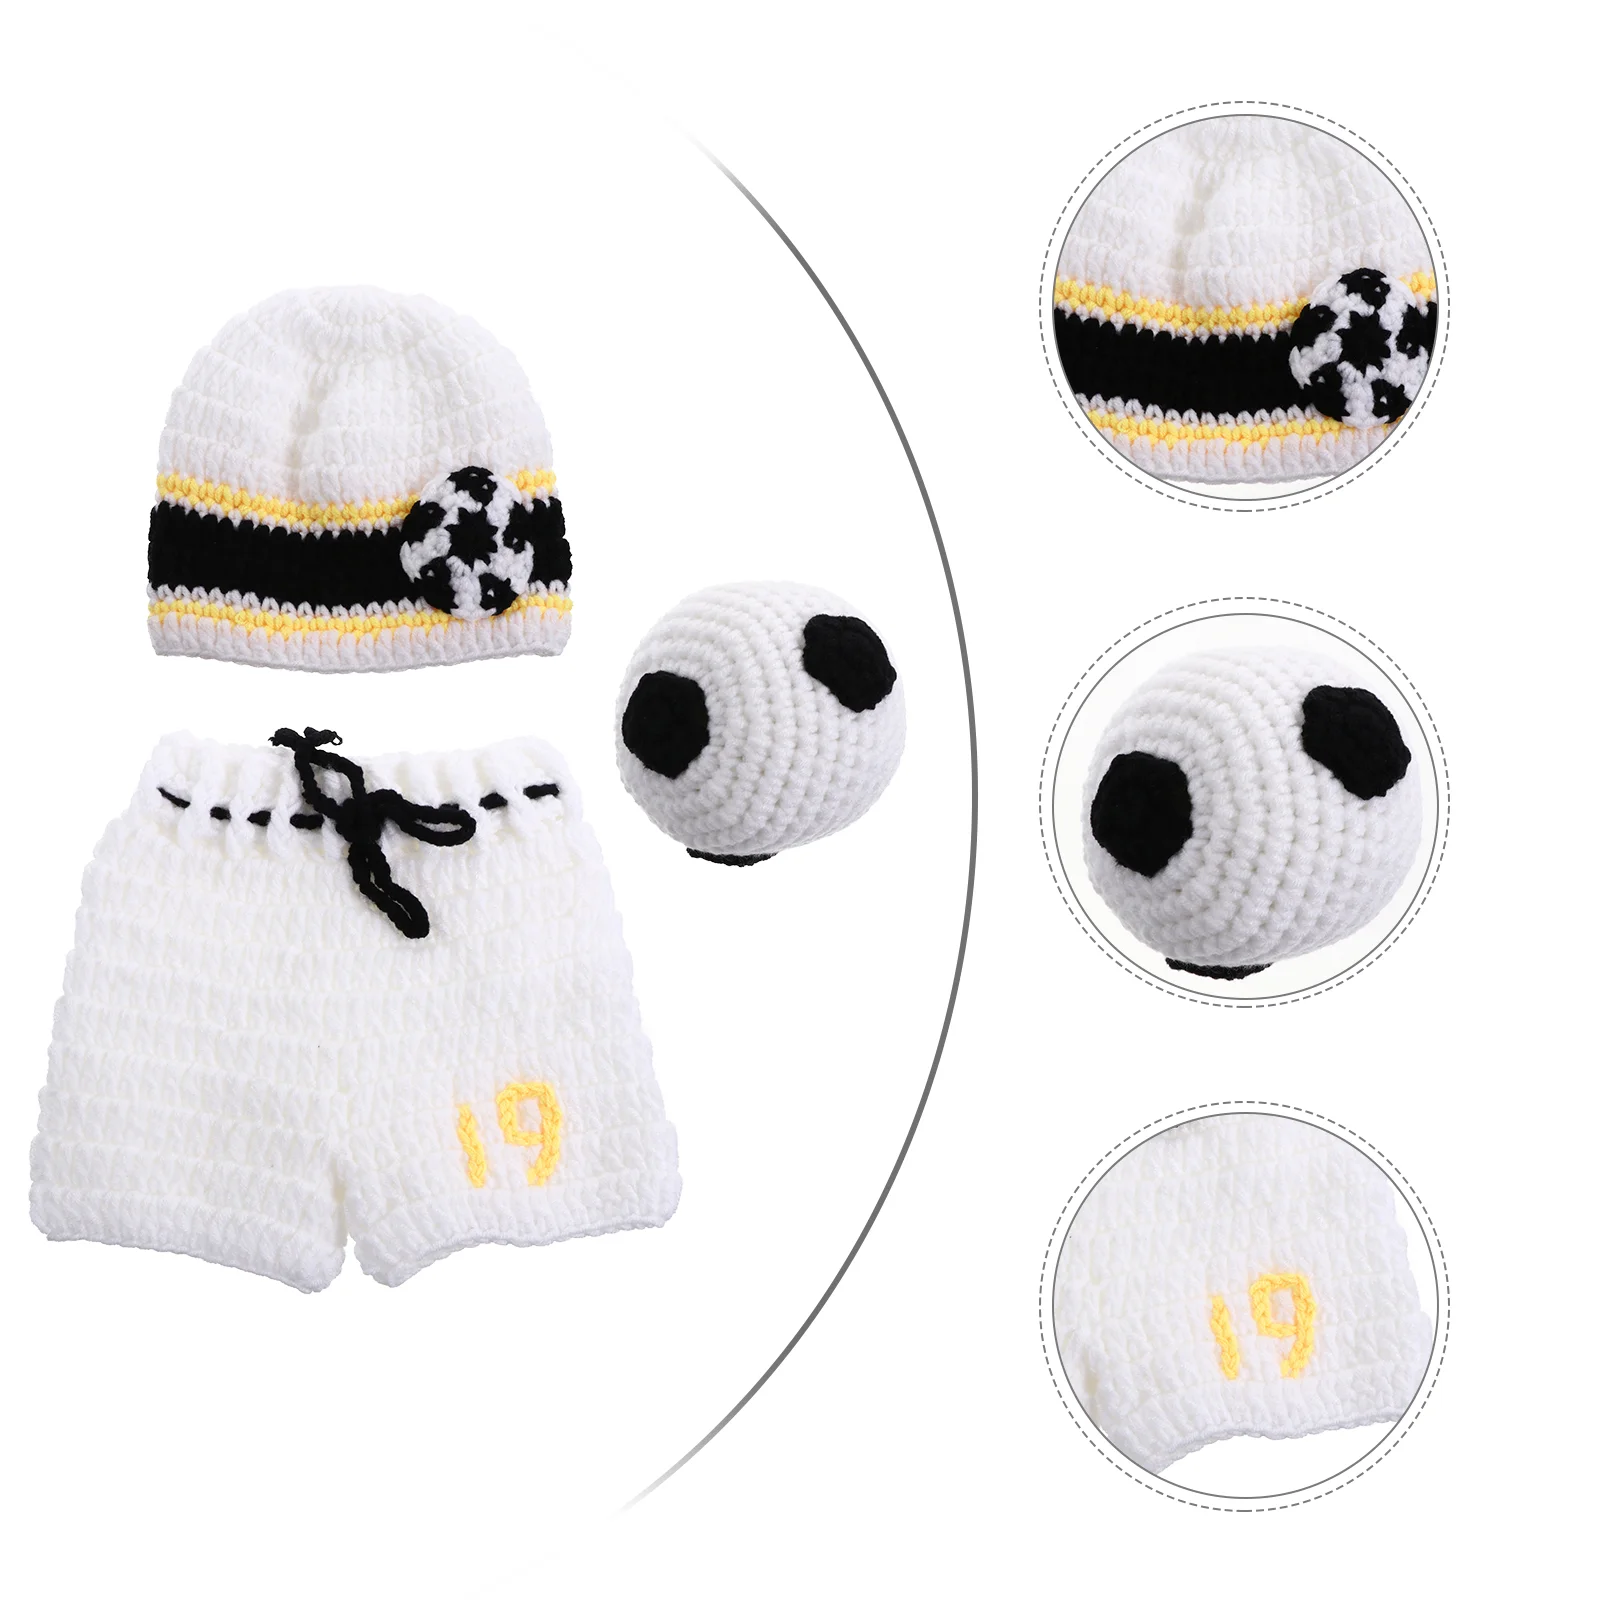 

Baby Photo Props Knits Clothing Lovely Clothes Costume Babies Weave Knitted Newborn Outfits Acrylic Photography Boy